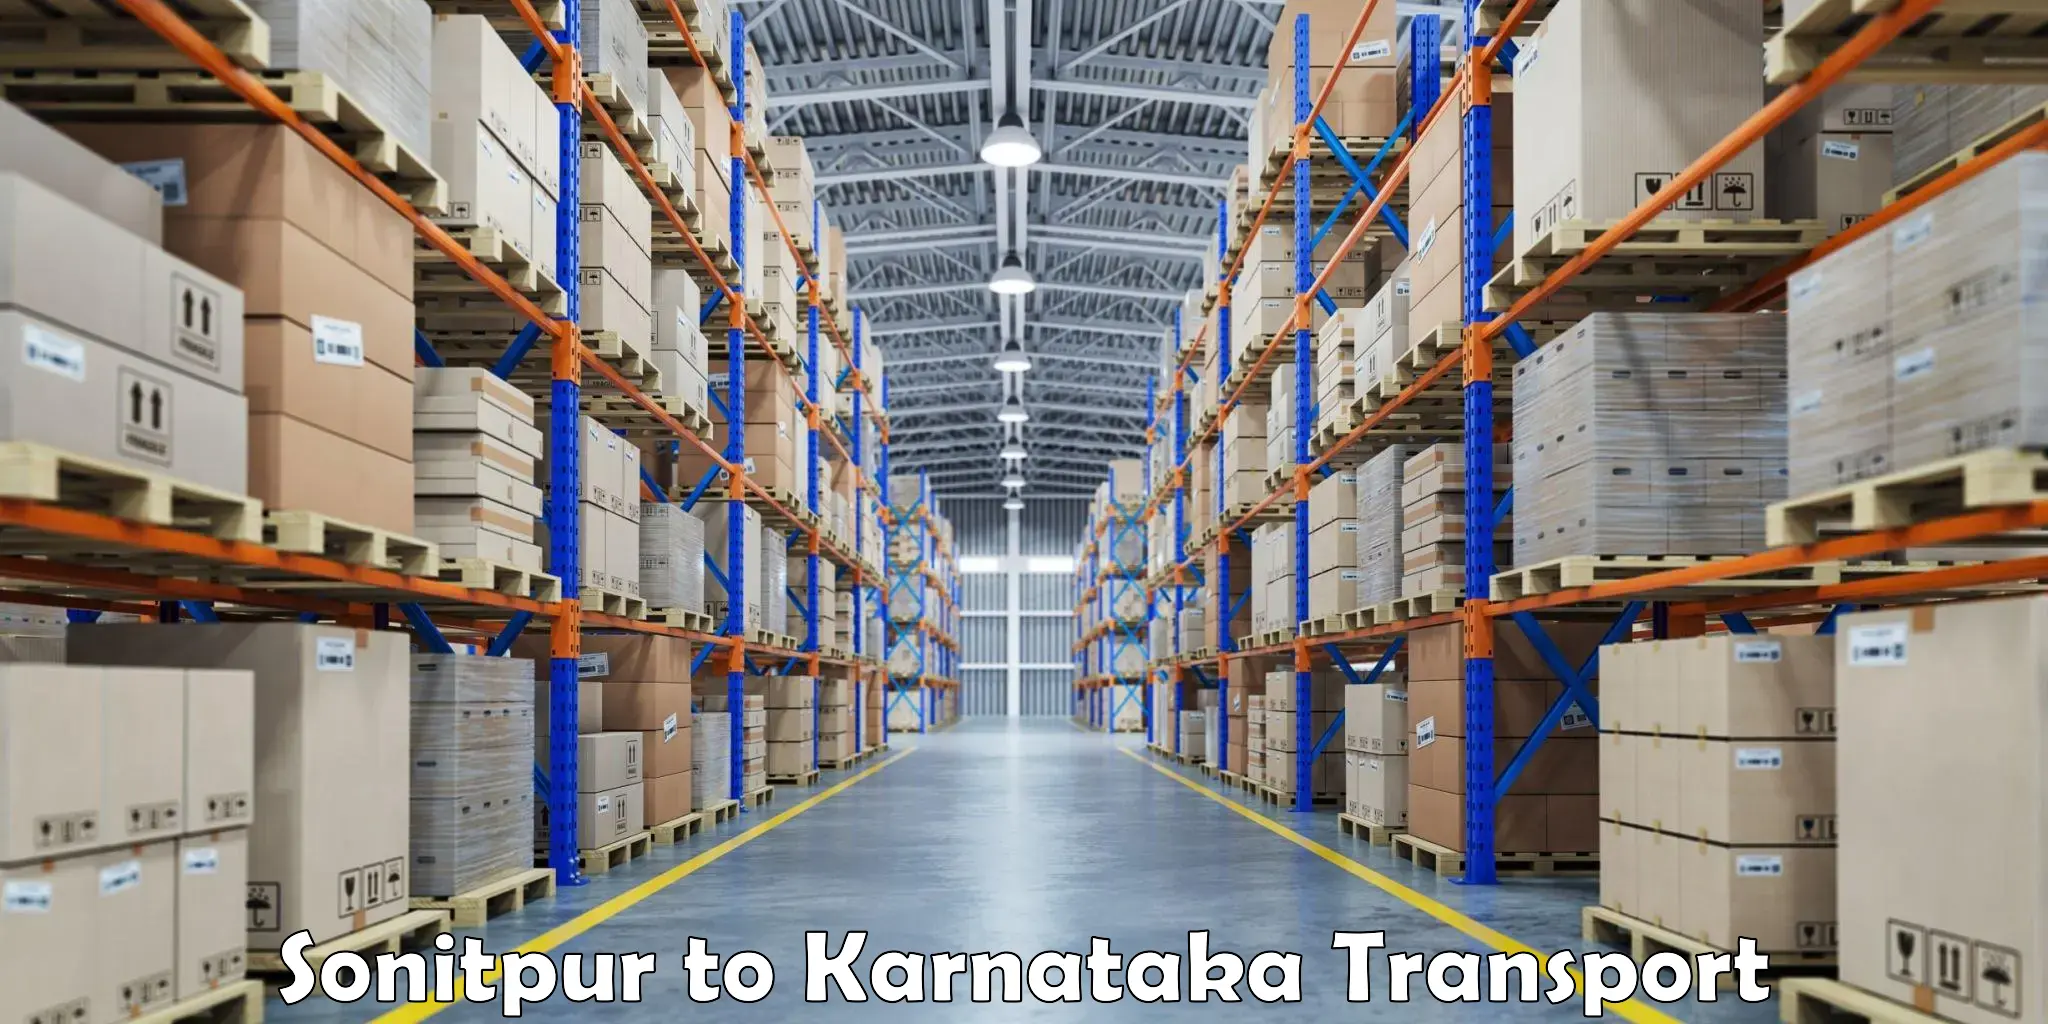 Container transport service Sonitpur to Gangavathi